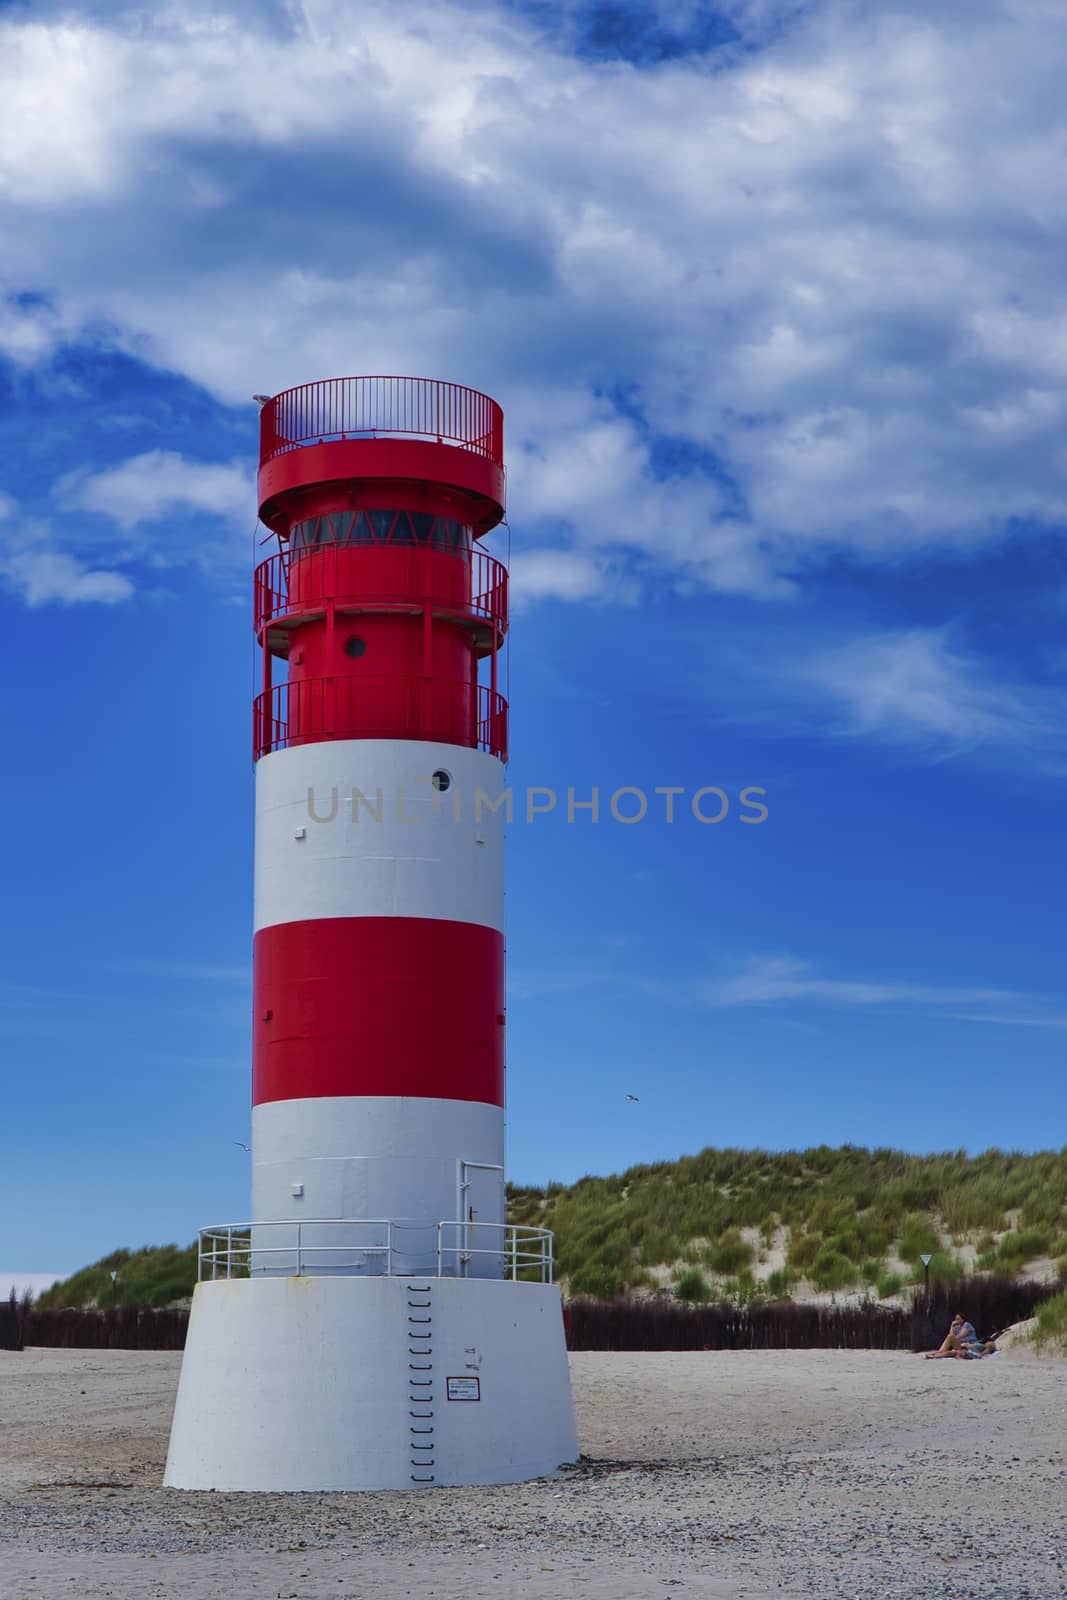 The red and white small Lighthouse on Island Dune - Heligoland - Germany with blue Sky